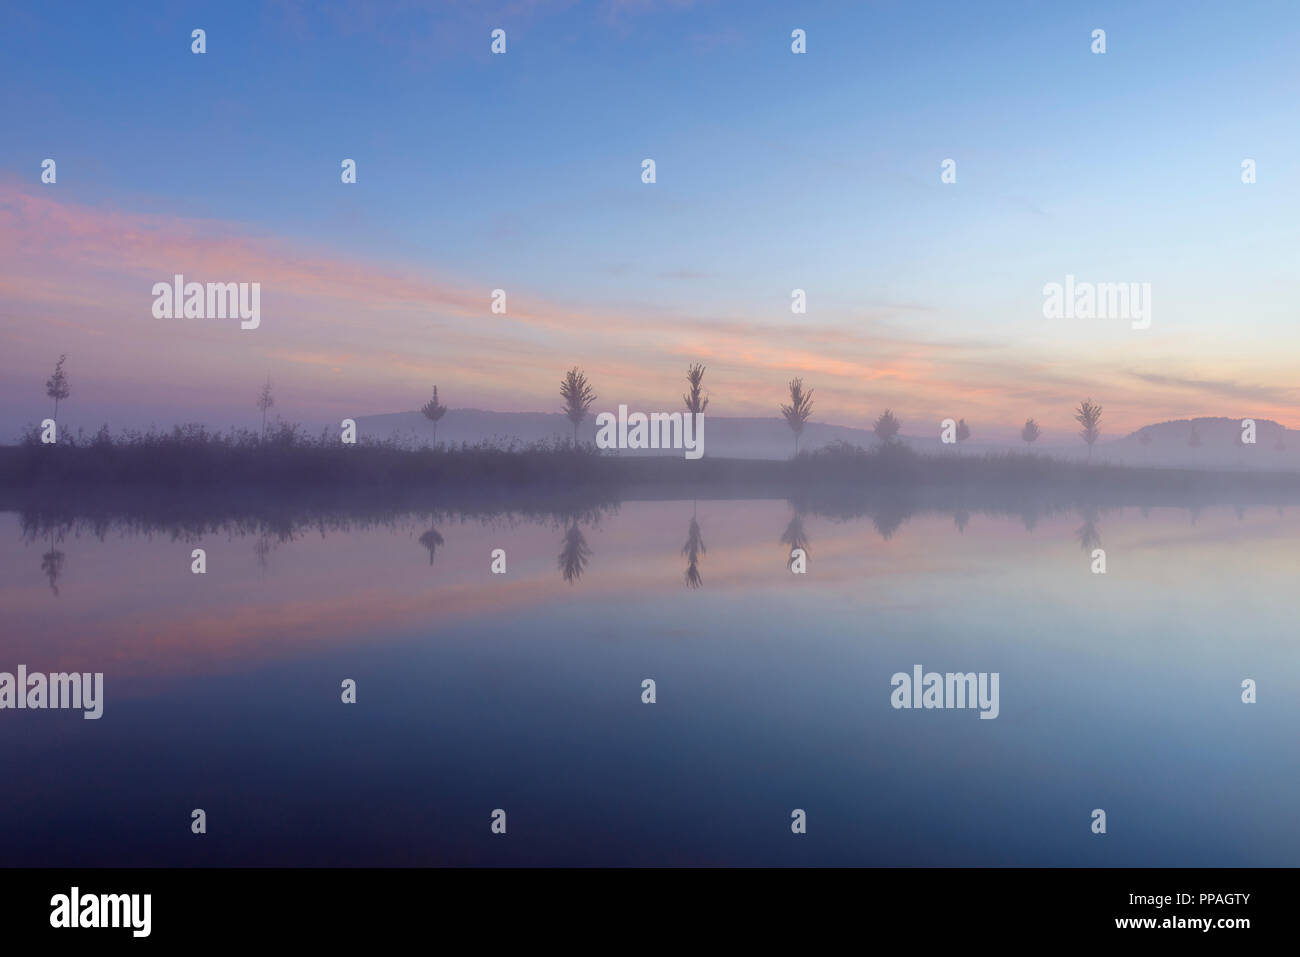 Landscape with Row of Trees Reflecting in Lake at Dawn with Morning Mist, Drei Gleichen, Ilm District, Thuringia, Germany Stock Photo